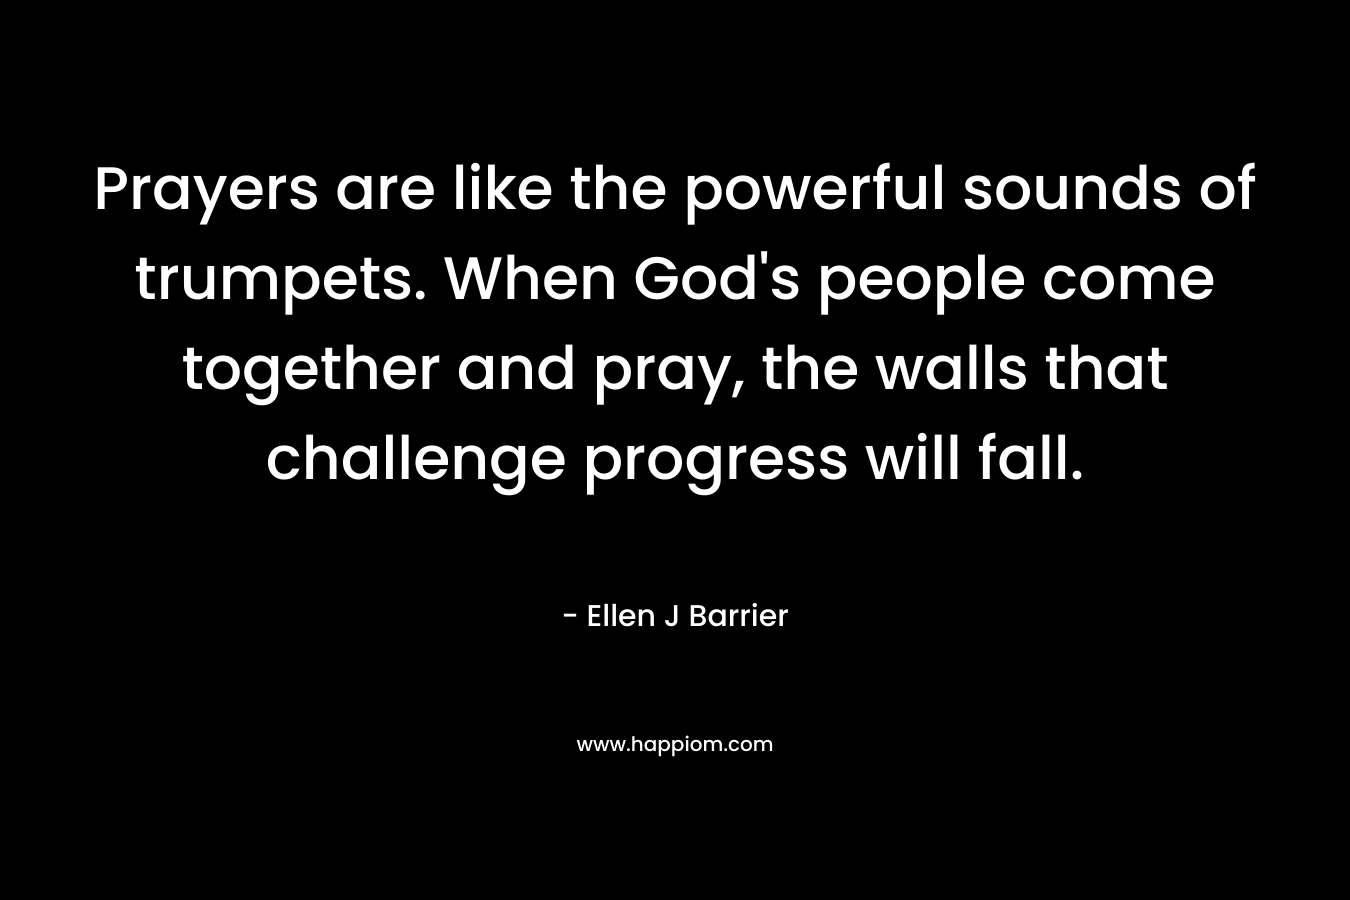 Prayers are like the powerful sounds of trumpets. When God's people come together and pray, the walls that challenge progress will fall.